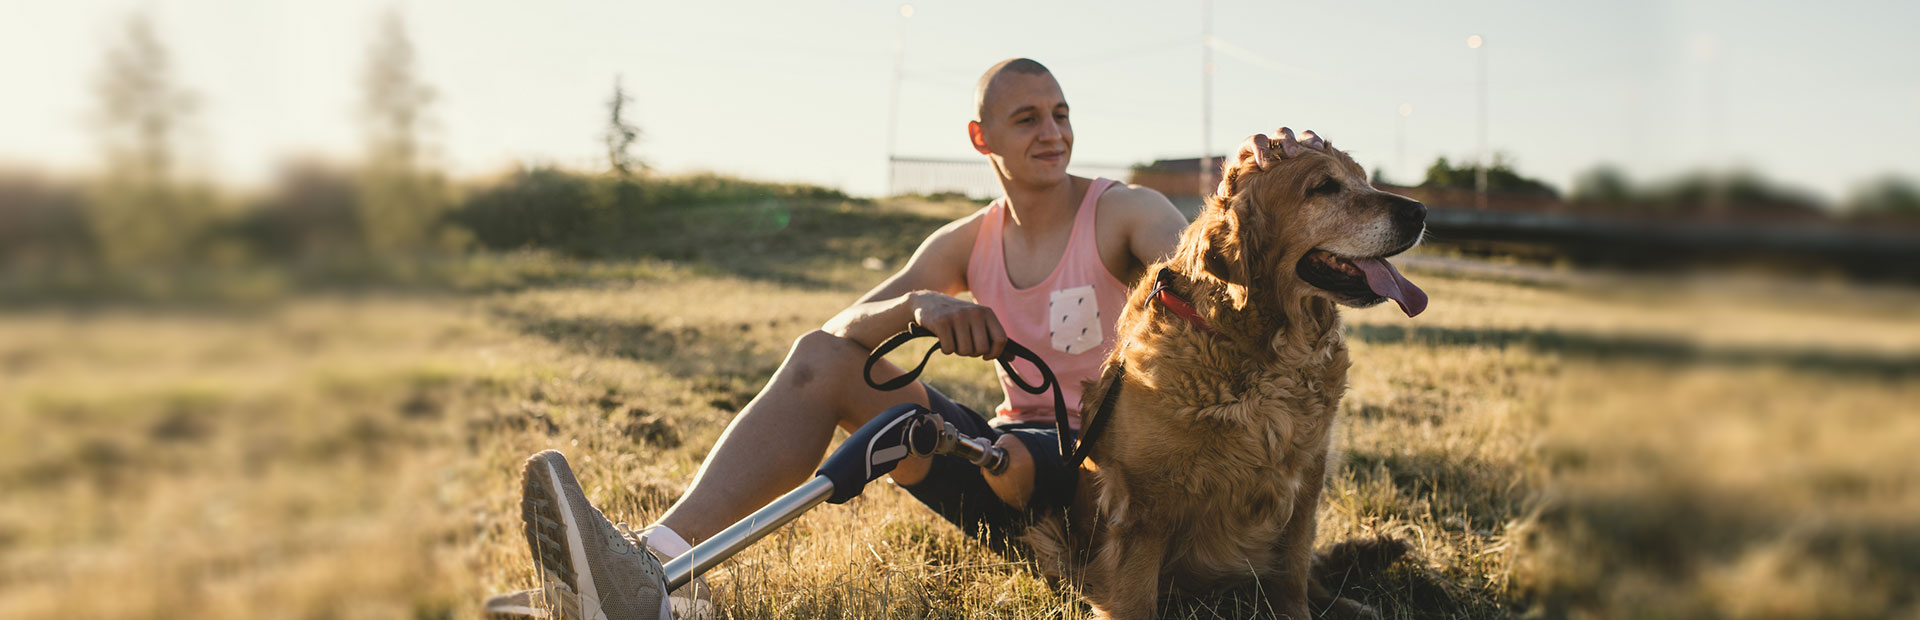 A photo of a man with a prosthetic leg and his dog